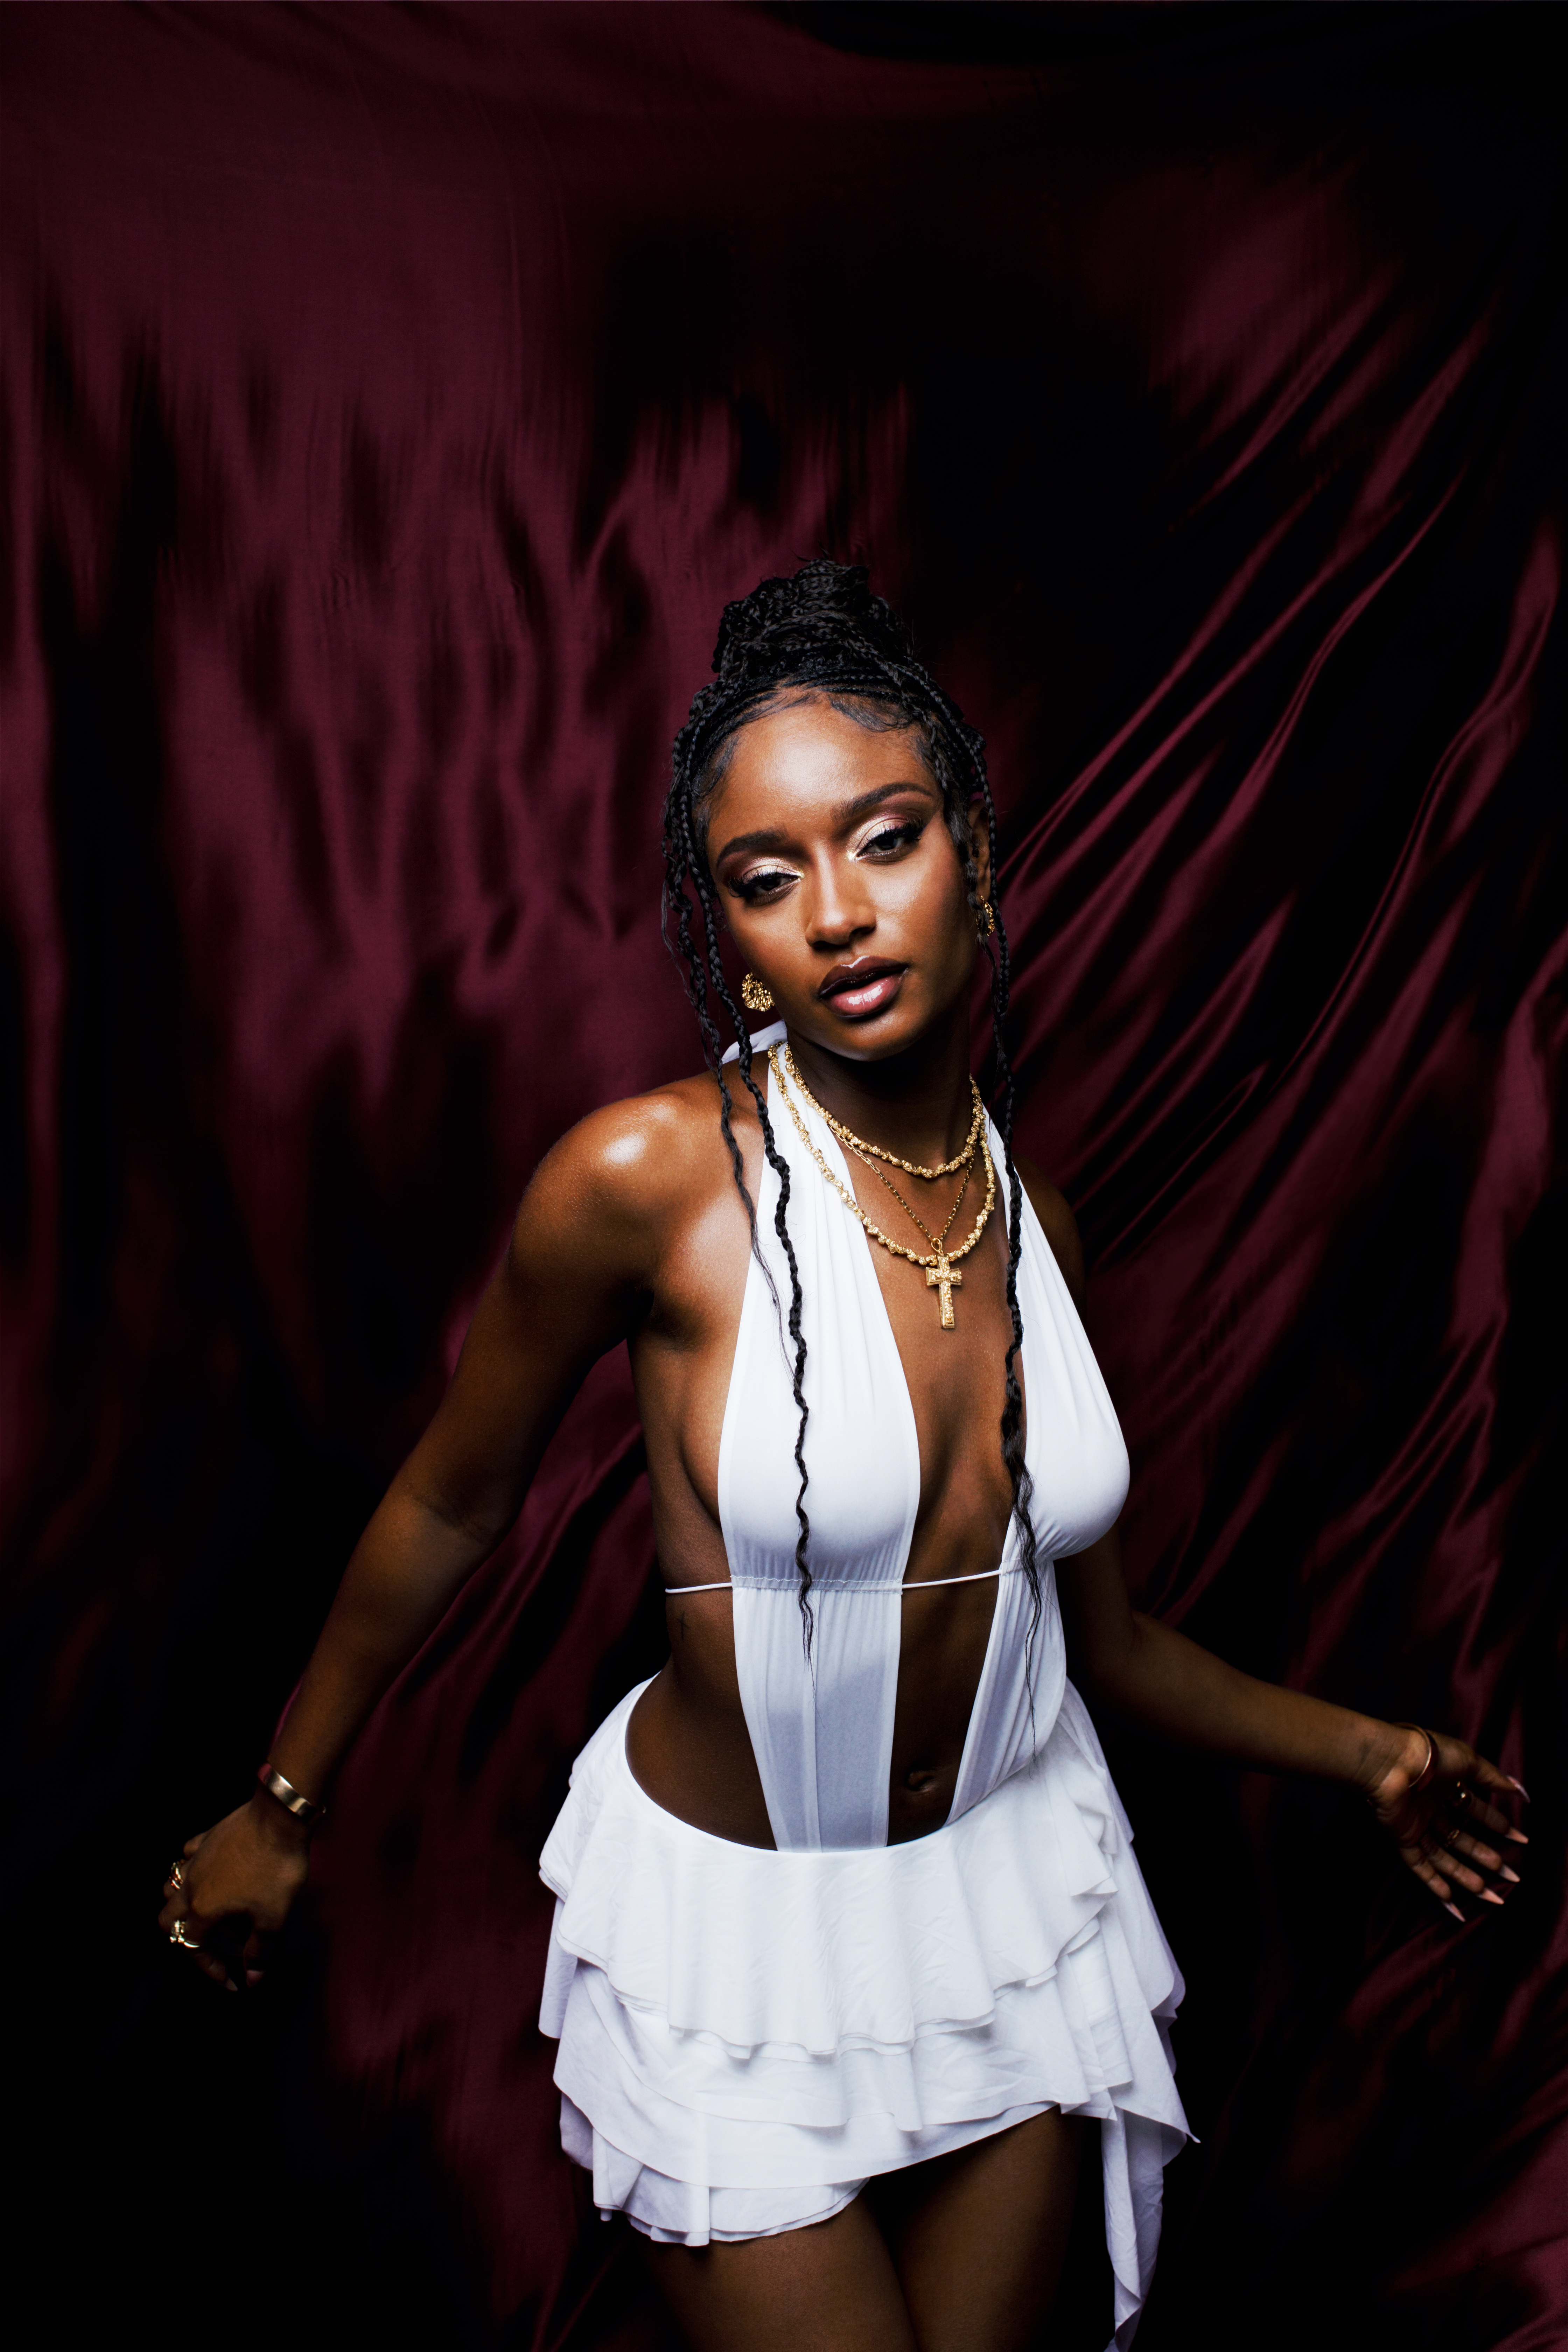 Ayra Starr is promoting her soulful single Rhythm & Blues